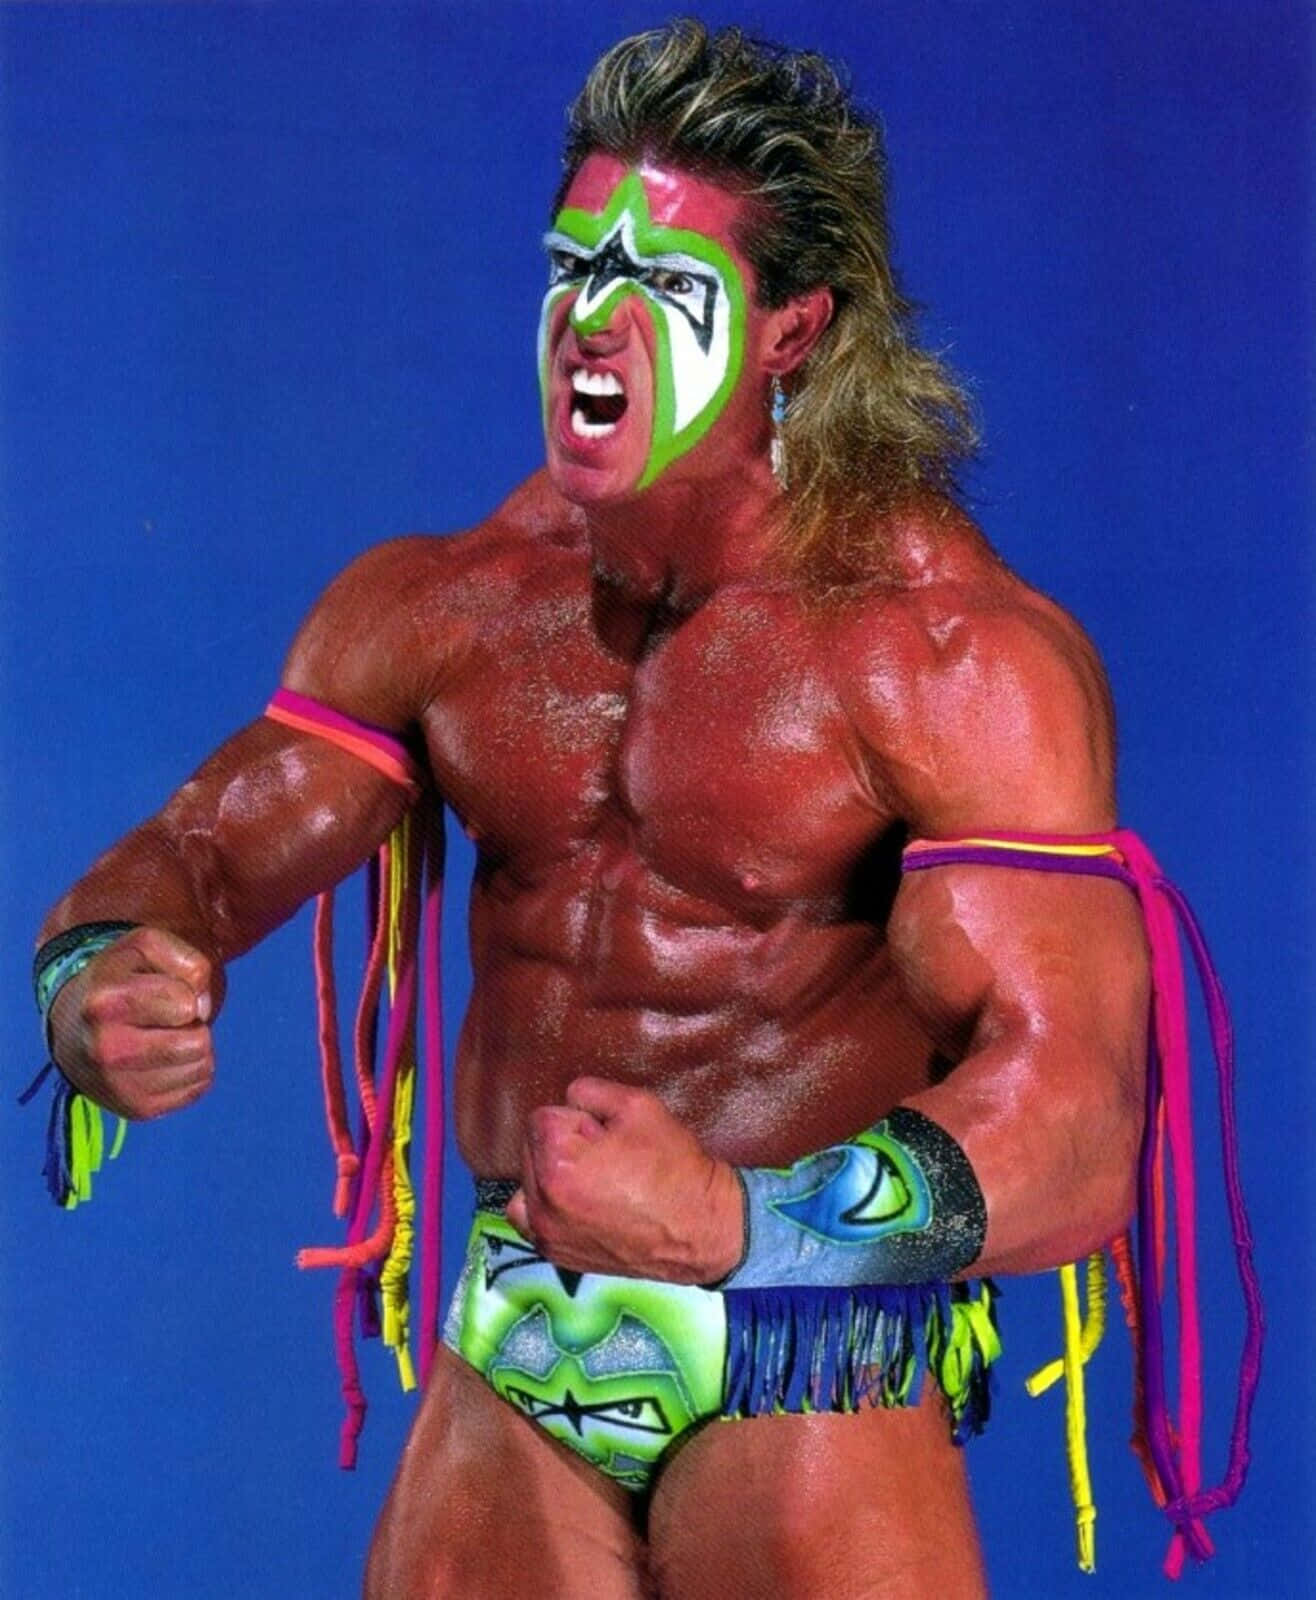 Wwe Legend - The Ultimate Warrior In His Iconic Neon Costume Wallpaper